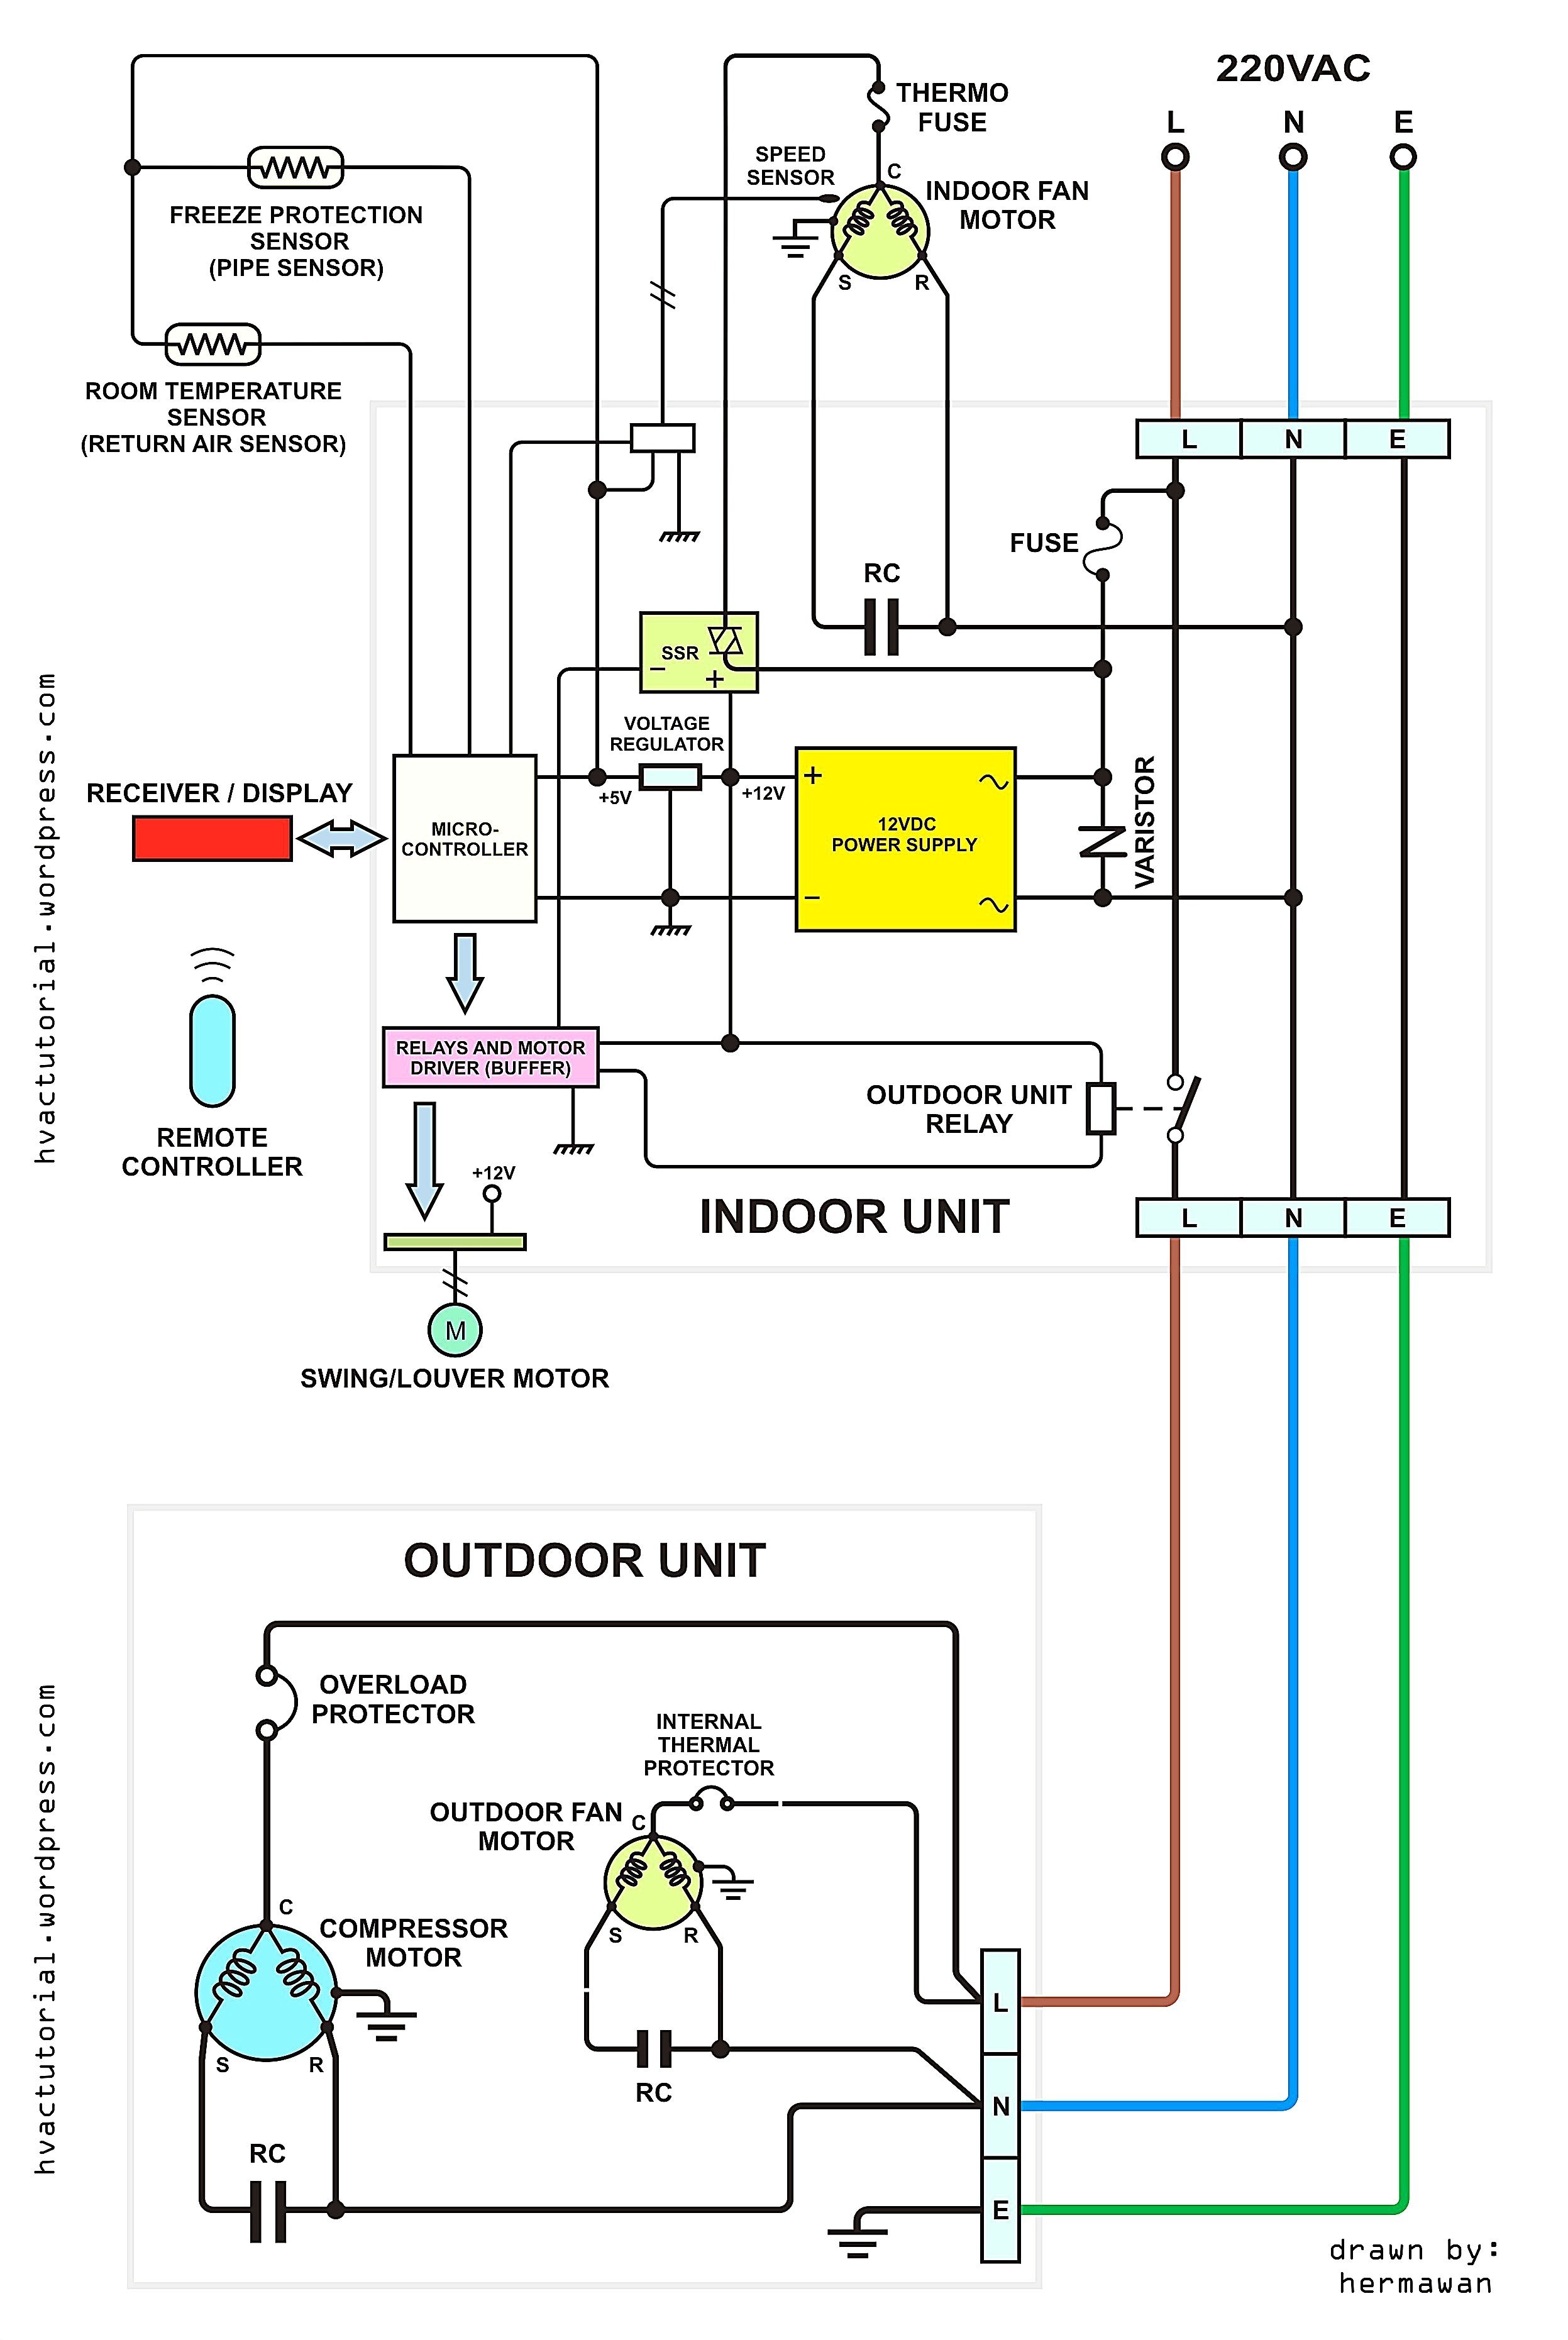 Heating and Cooling thermostat Wiring Diagram Elegant Heat Pump thermostat Wiring Diagram Diagram Of Heating and Cooling thermostat Wiring Diagram